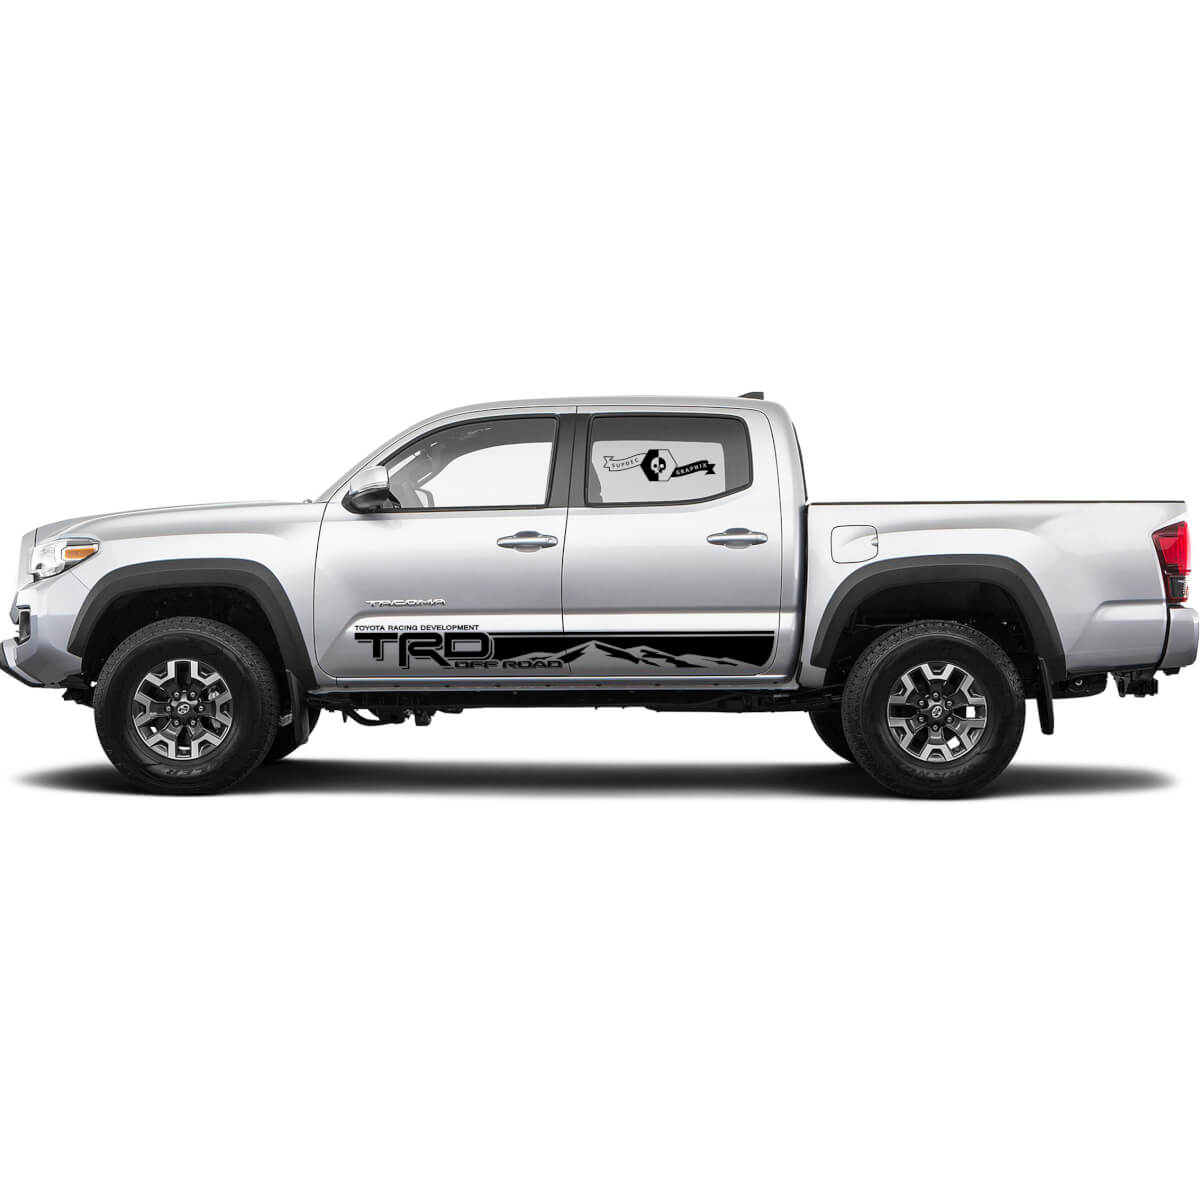 TRD Toyota Racing Mountains Style for Rocker Panel Decals Stickers for Tacoma FJ Cruiser Tundra Hilux 4Runner